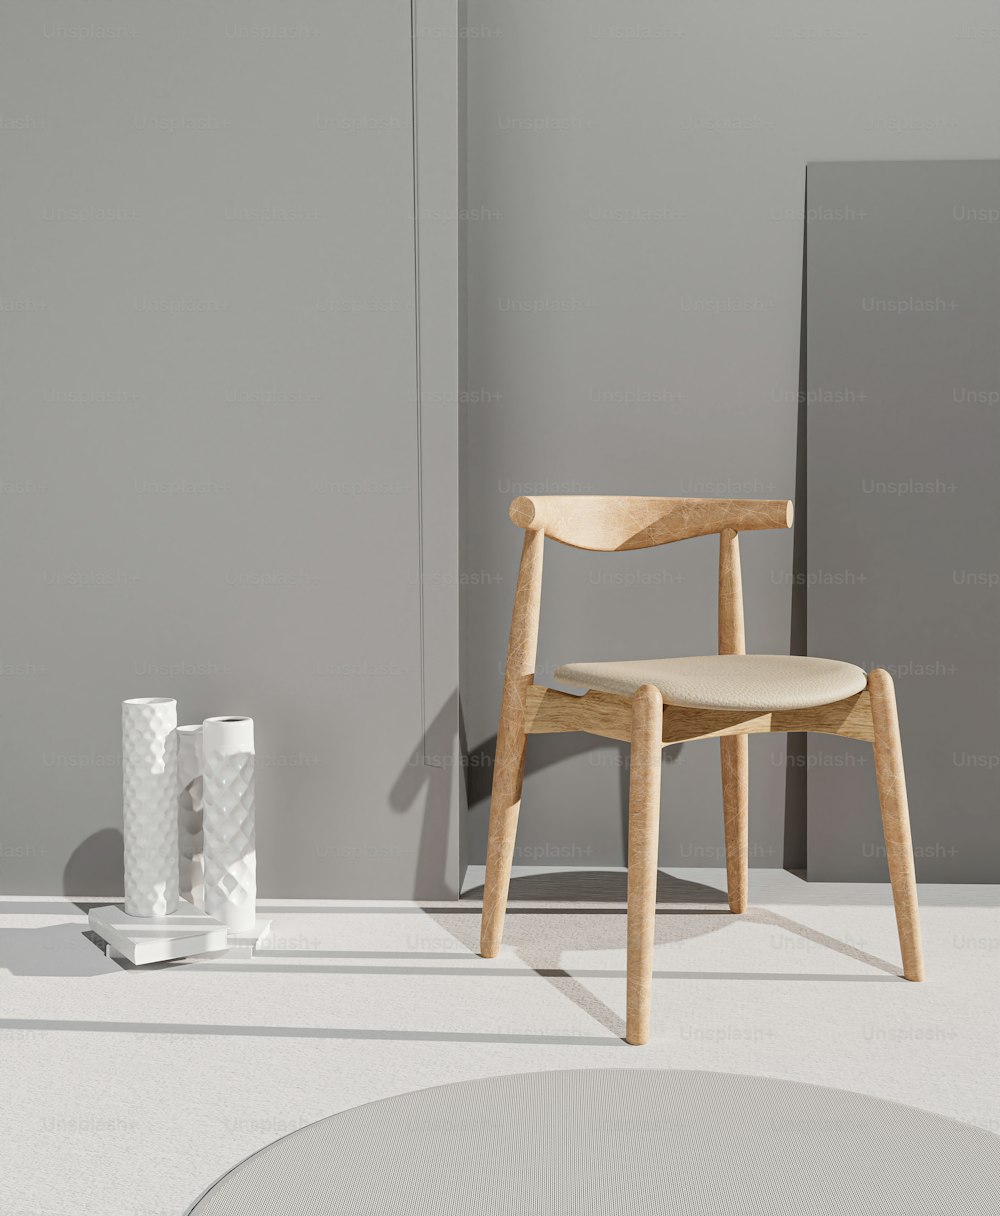 a wooden chair sitting next to a white vase